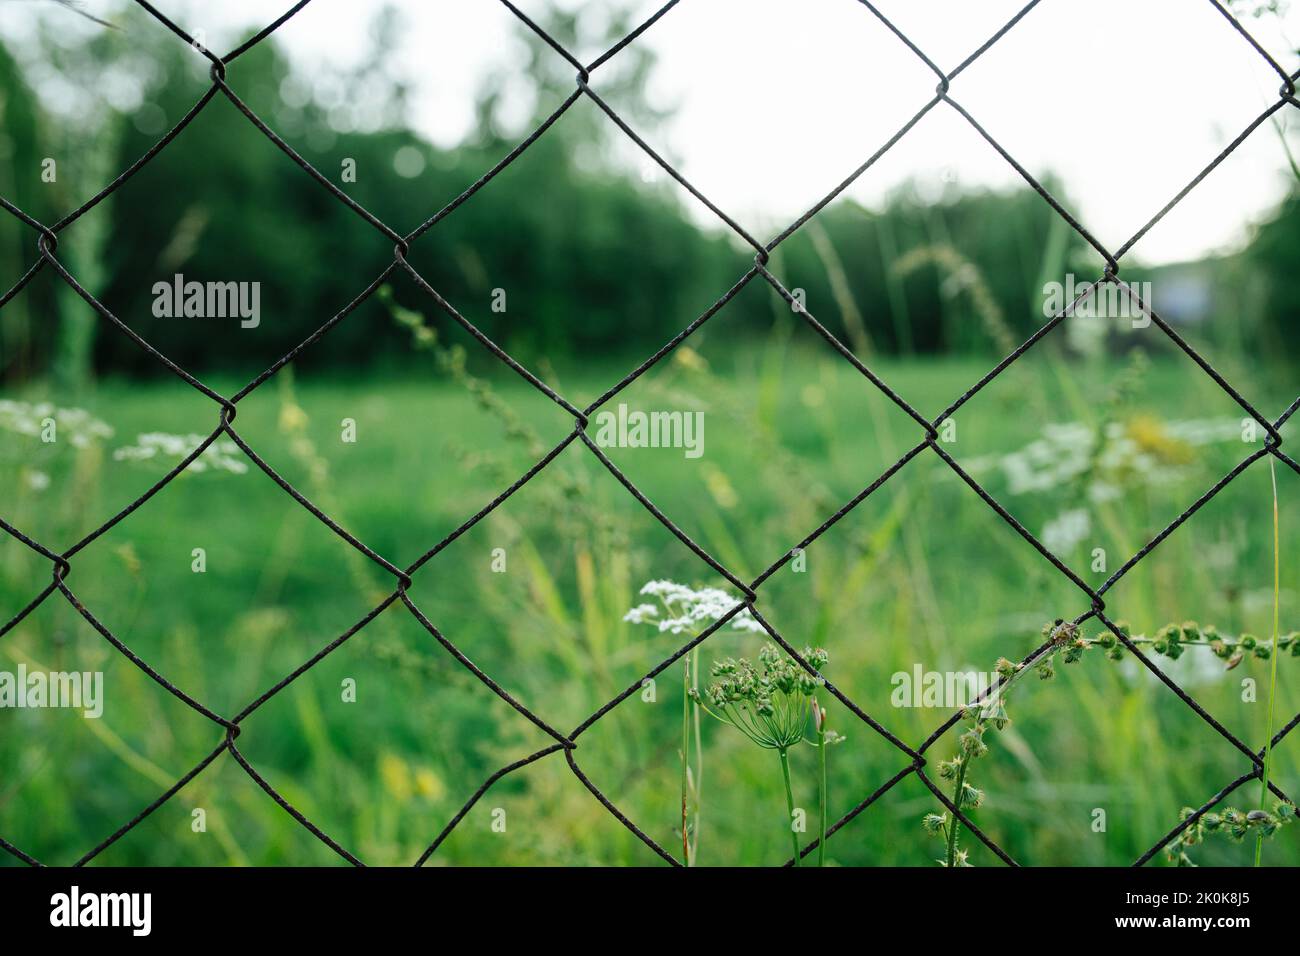 Metal net fence in front of a blurred green field. Stock Photo